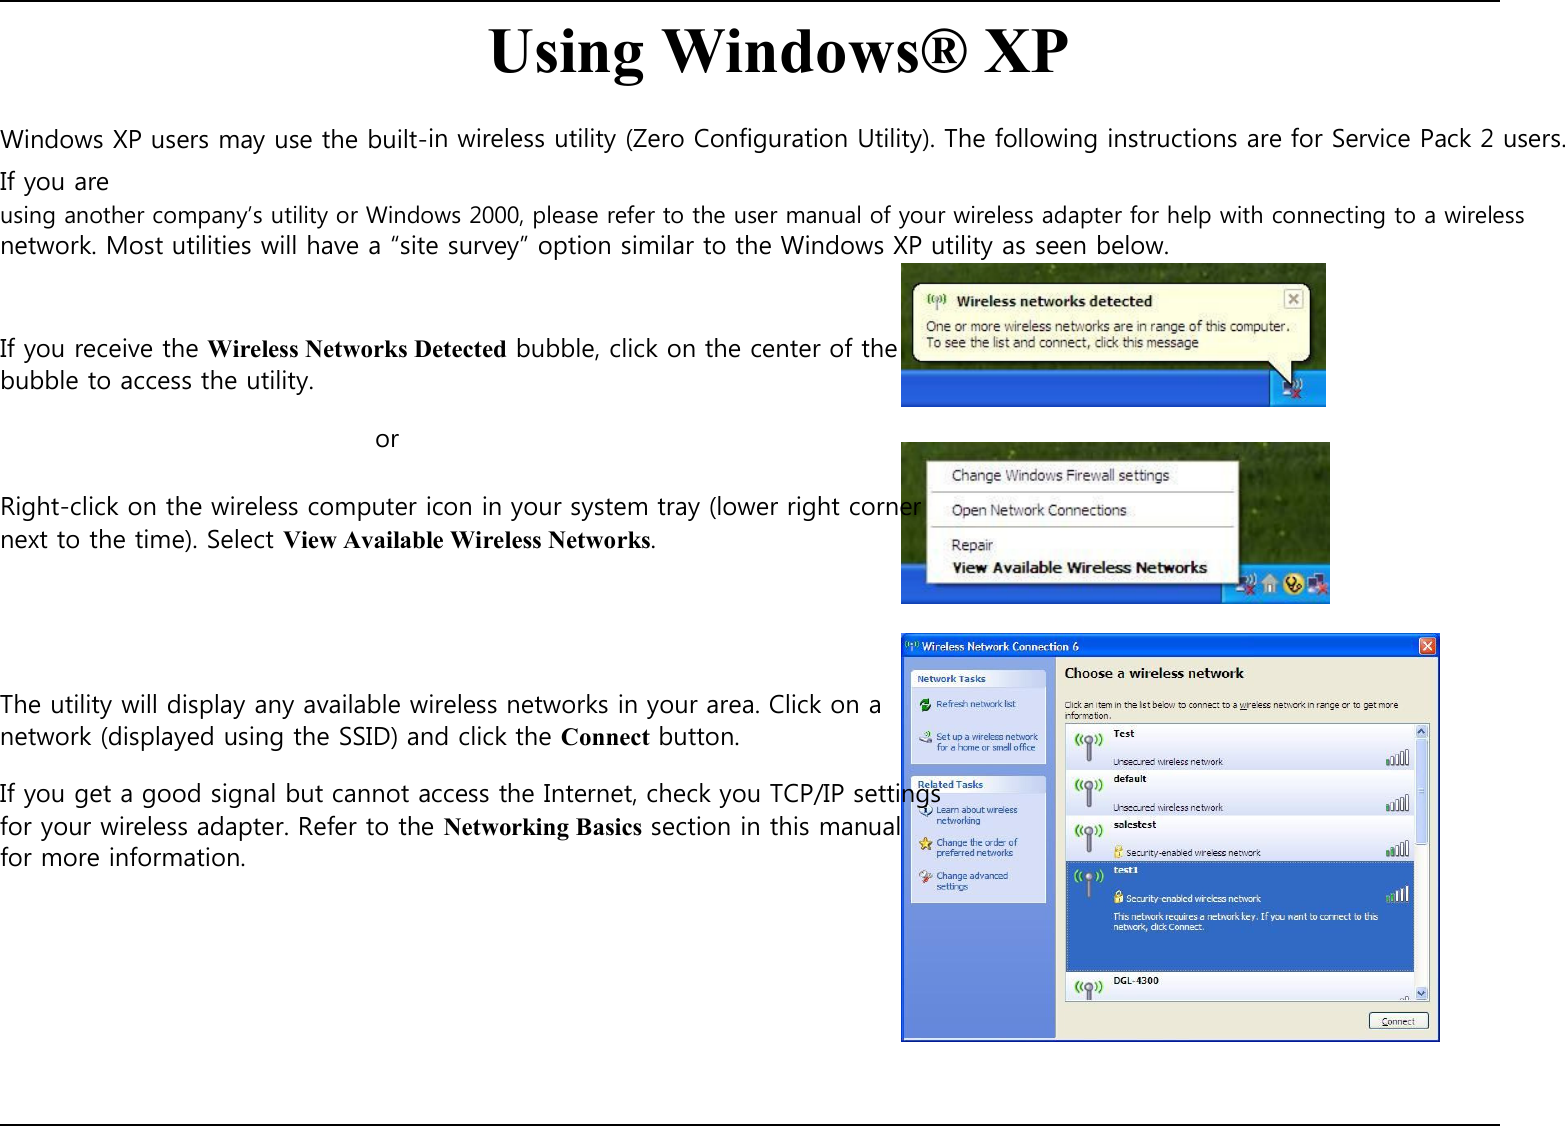    Using Windows® XP  Windows XP users may use the built-in wireless utility (Zero Configuration Utility). The following instructions are for Service Pack 2 users. If you are using another company’s utility or Windows 2000, please refer to the user manual of your wireless adapter for help with connecting to a wireless network. Most utilities will have a “site survey” option similar to the Windows XP utility as seen below.    If you receive the Wireless Networks Detected bubble, click on the center of the bubble to access the utility.  or  Right-click on the wireless computer icon in your system tray (lower right corner next to the time). Select View Available Wireless Networks.       The utility will display any available wireless networks in your area. Click on a network (displayed using the SSID) and click the Connect button.  If you get a good signal but cannot access the Internet, check you TCP/IP settings for your wireless adapter. Refer to the Networking Basics section in this manual for more information.               